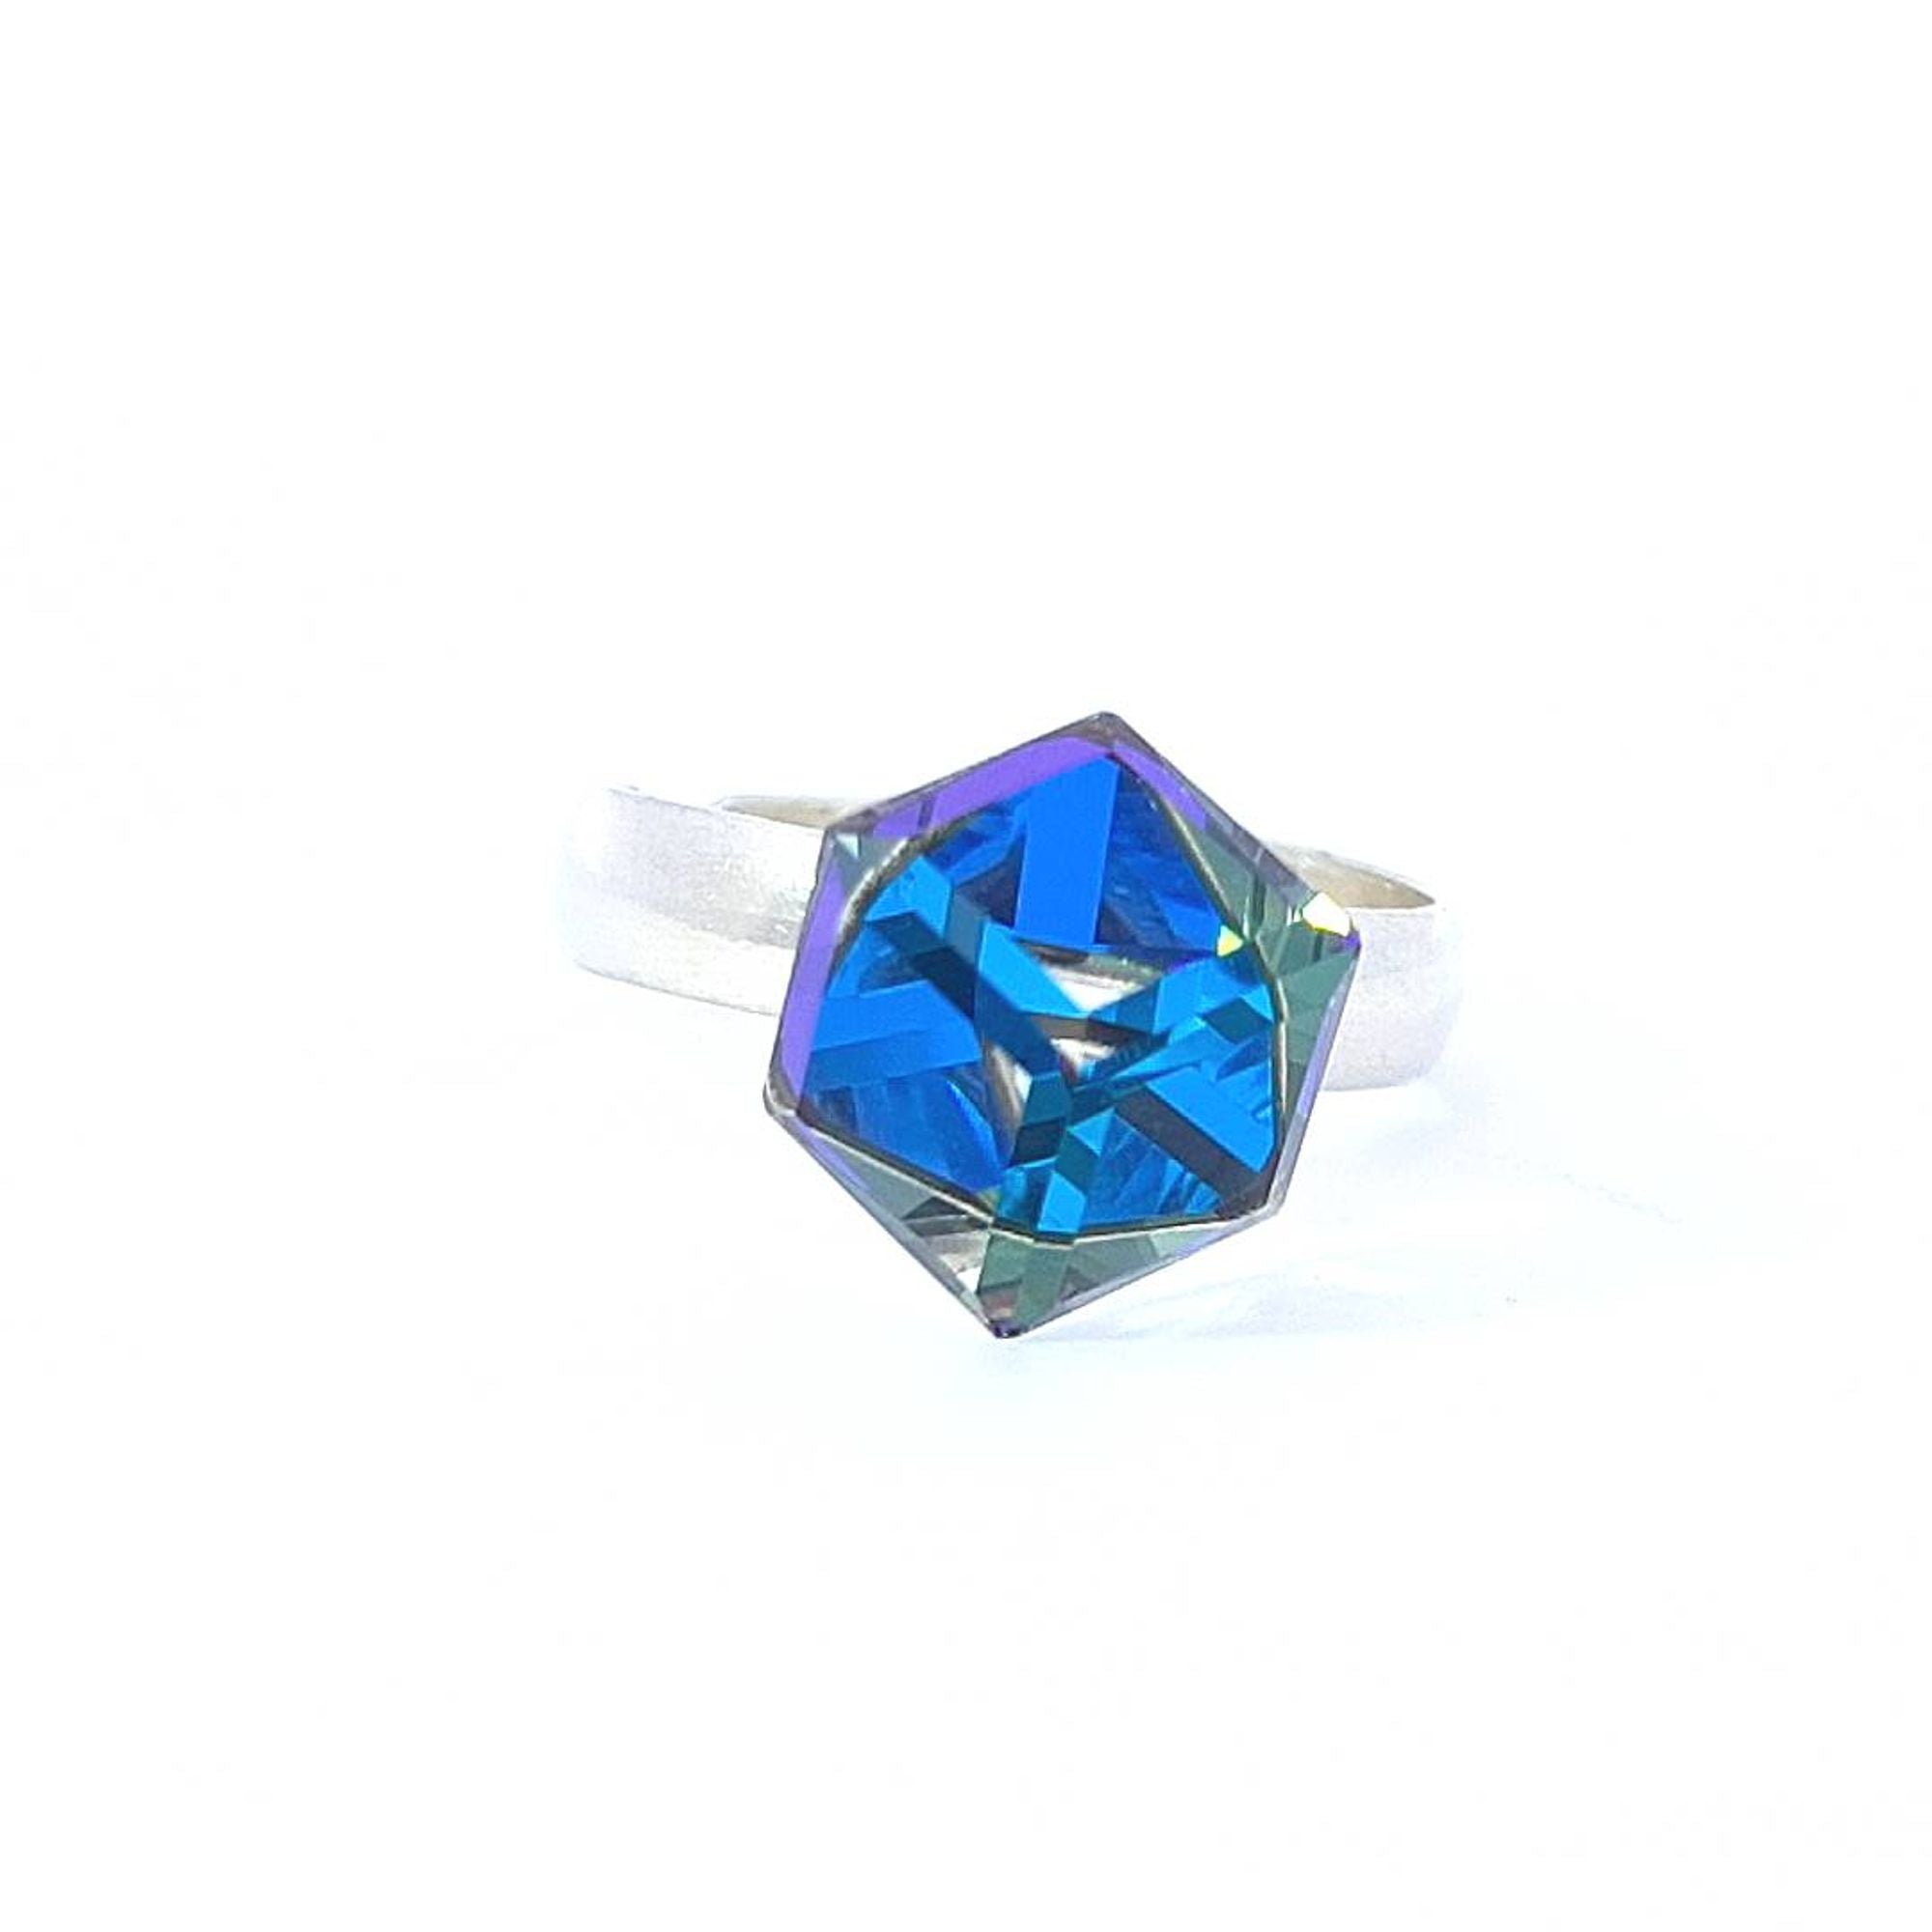 GeoGlimmer Cube Ring in Sterling Silver with a Striking Bermuda Blue Crystal by Magpie Gems